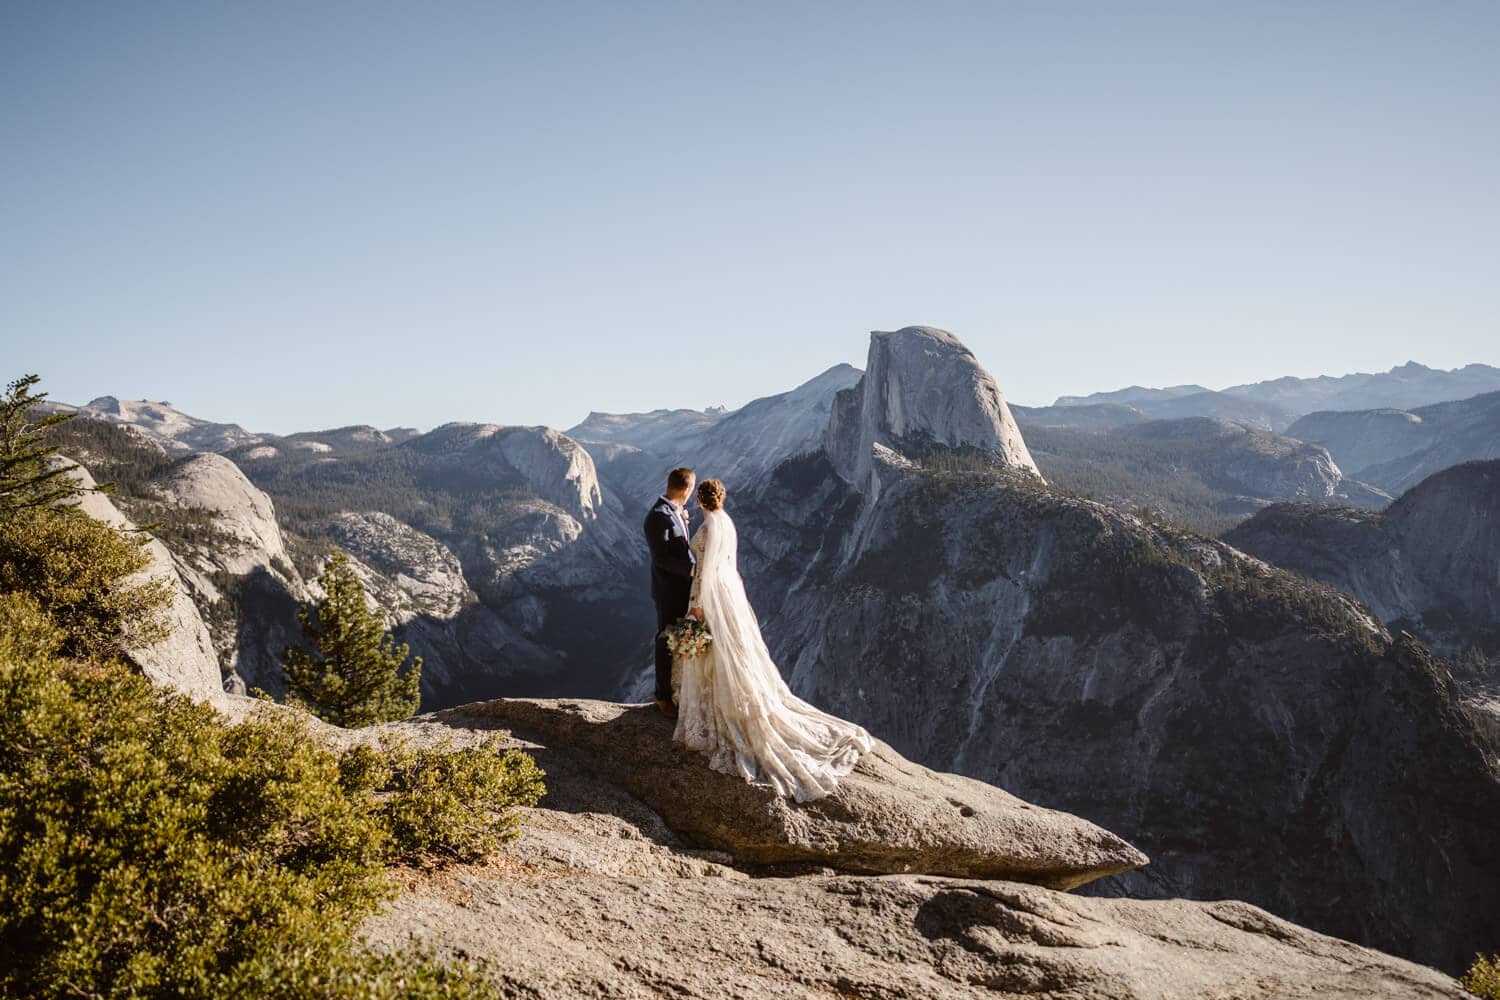 Wedding Dress What You Should Pack for Your Elopement